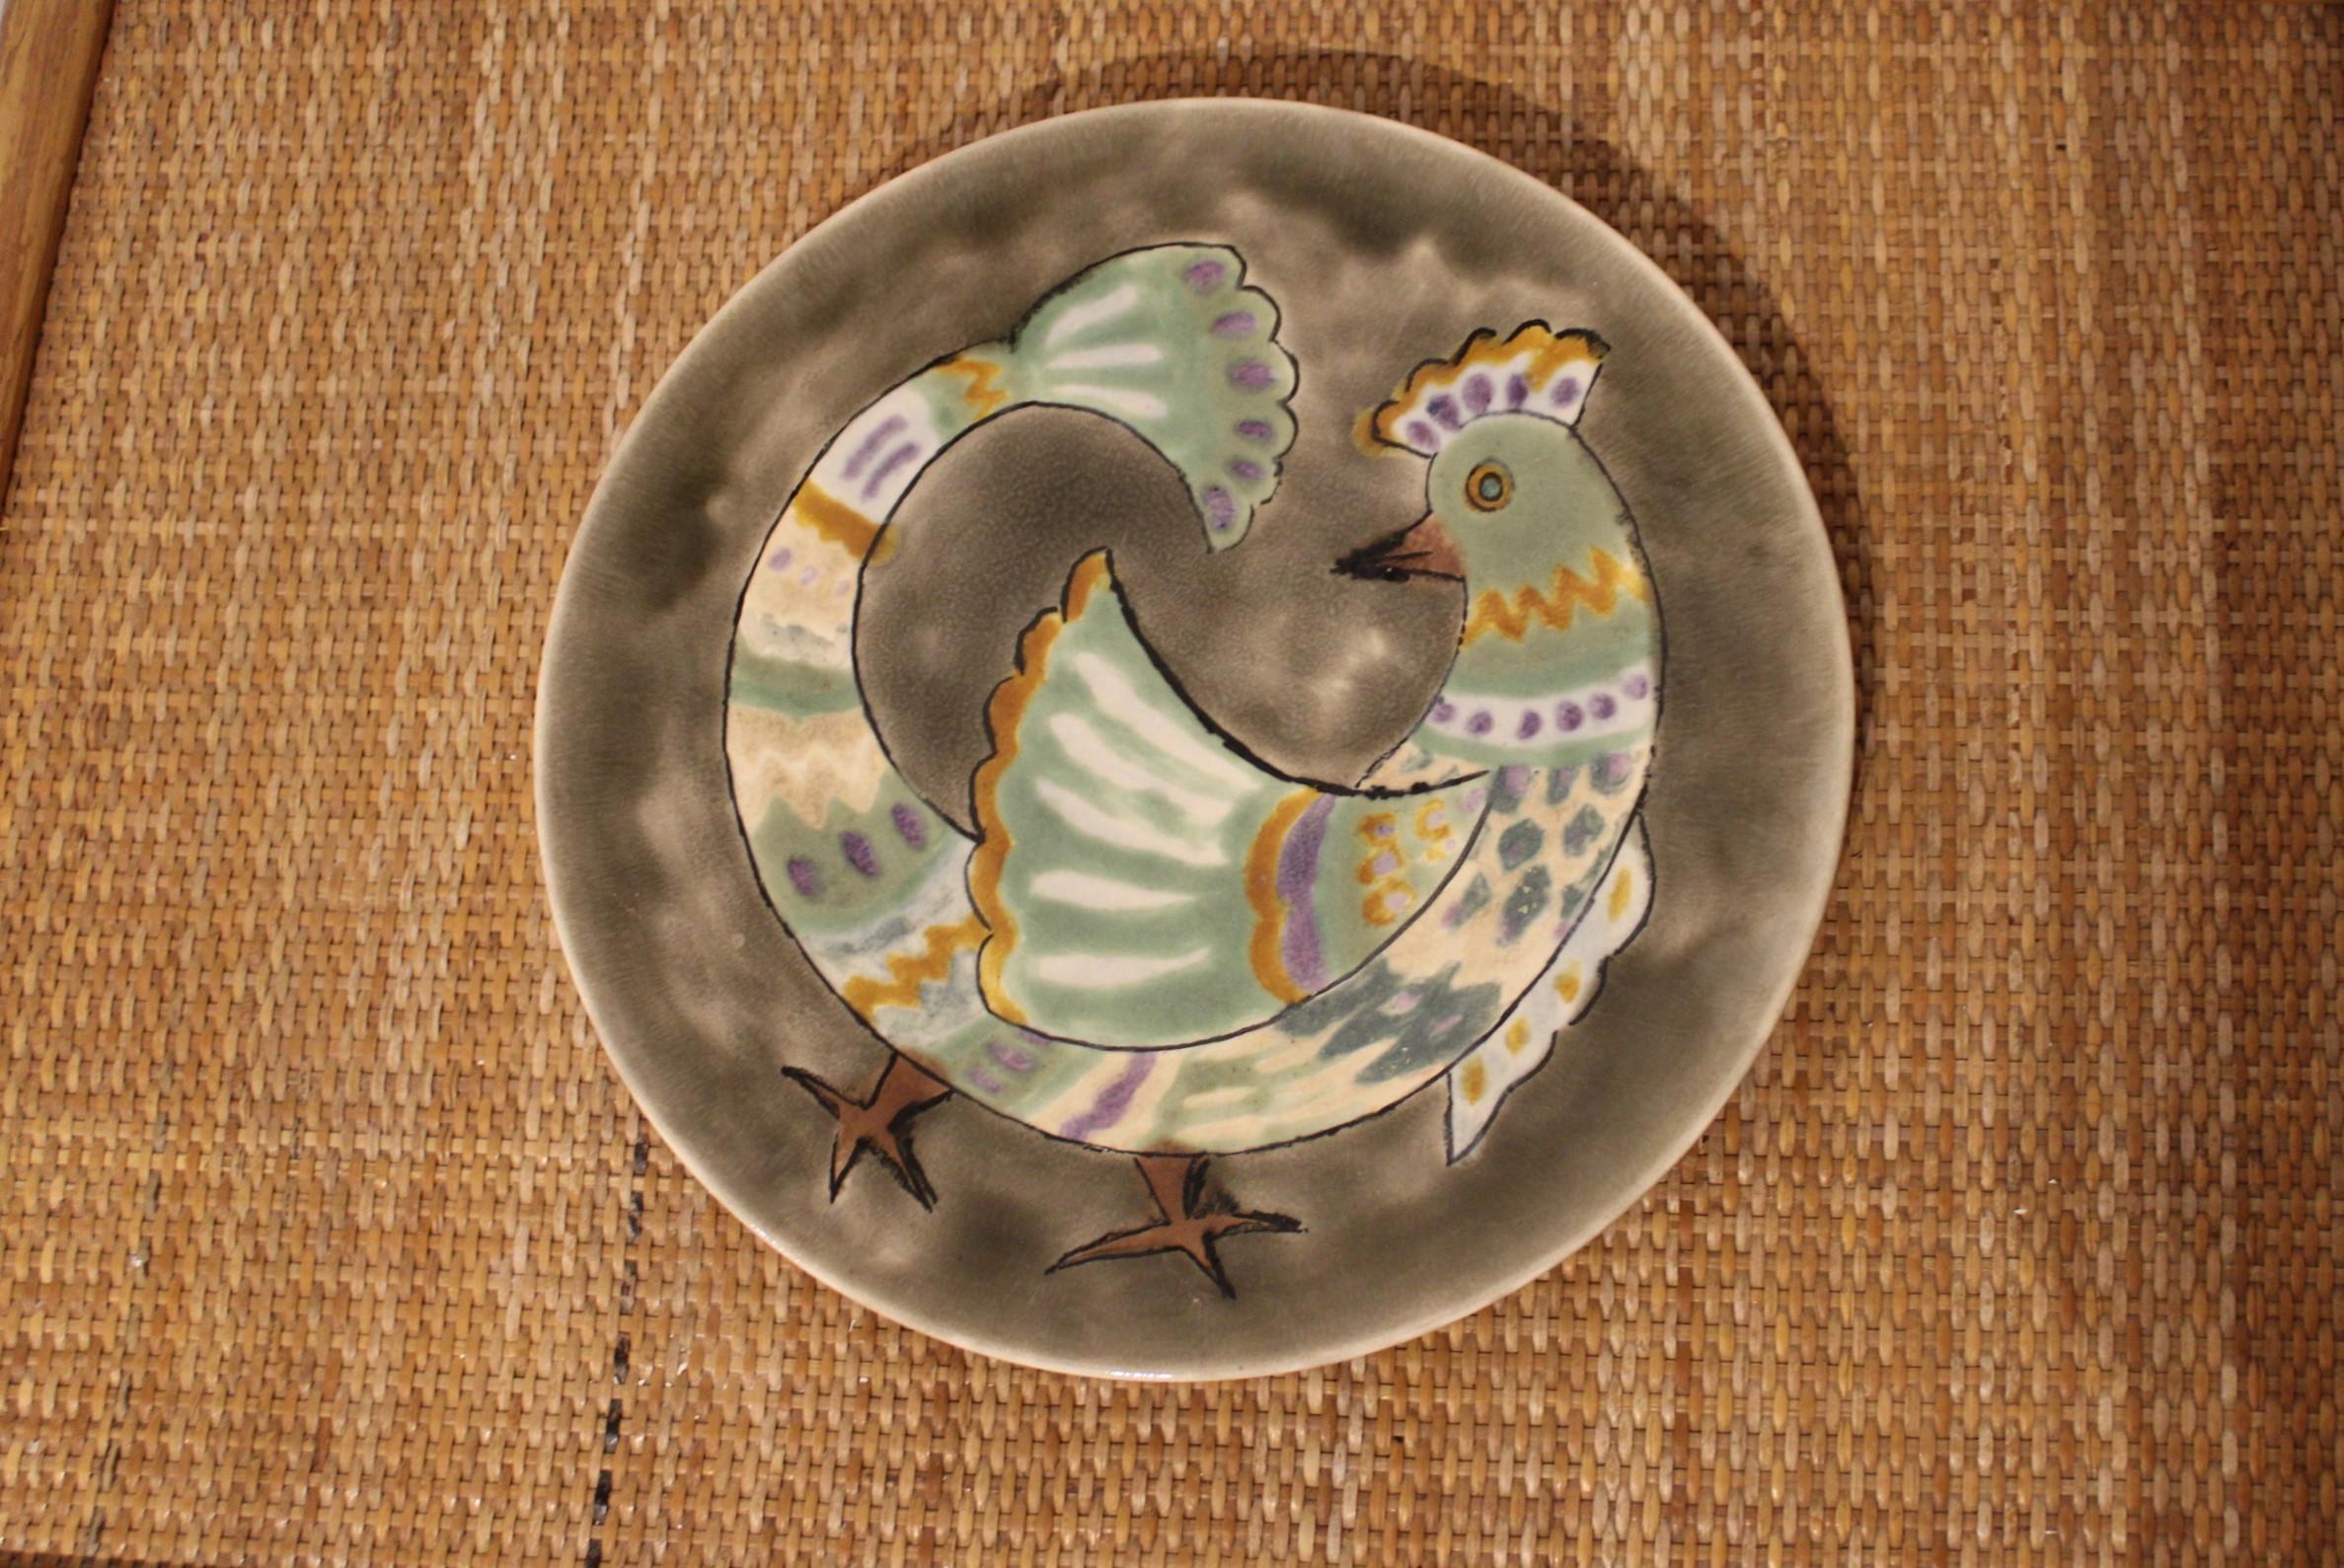 Ceramic plate decorated with a rooster. 
Signed under the plate.
French work, circa 1950.